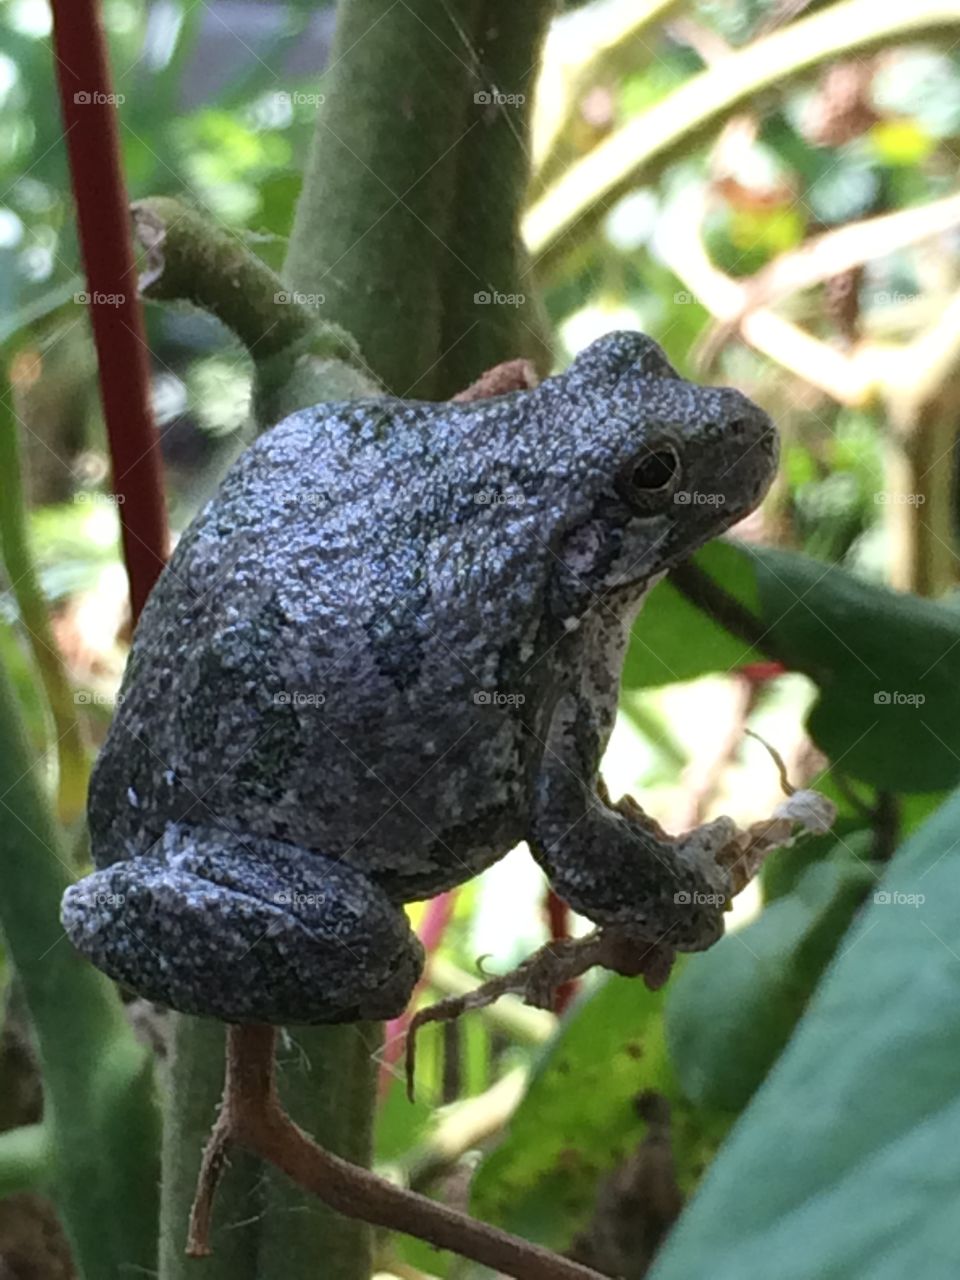 Tree Frog. Found this little guy in mom's garden. Mom thought it was a frog and Toad hybrid lol.